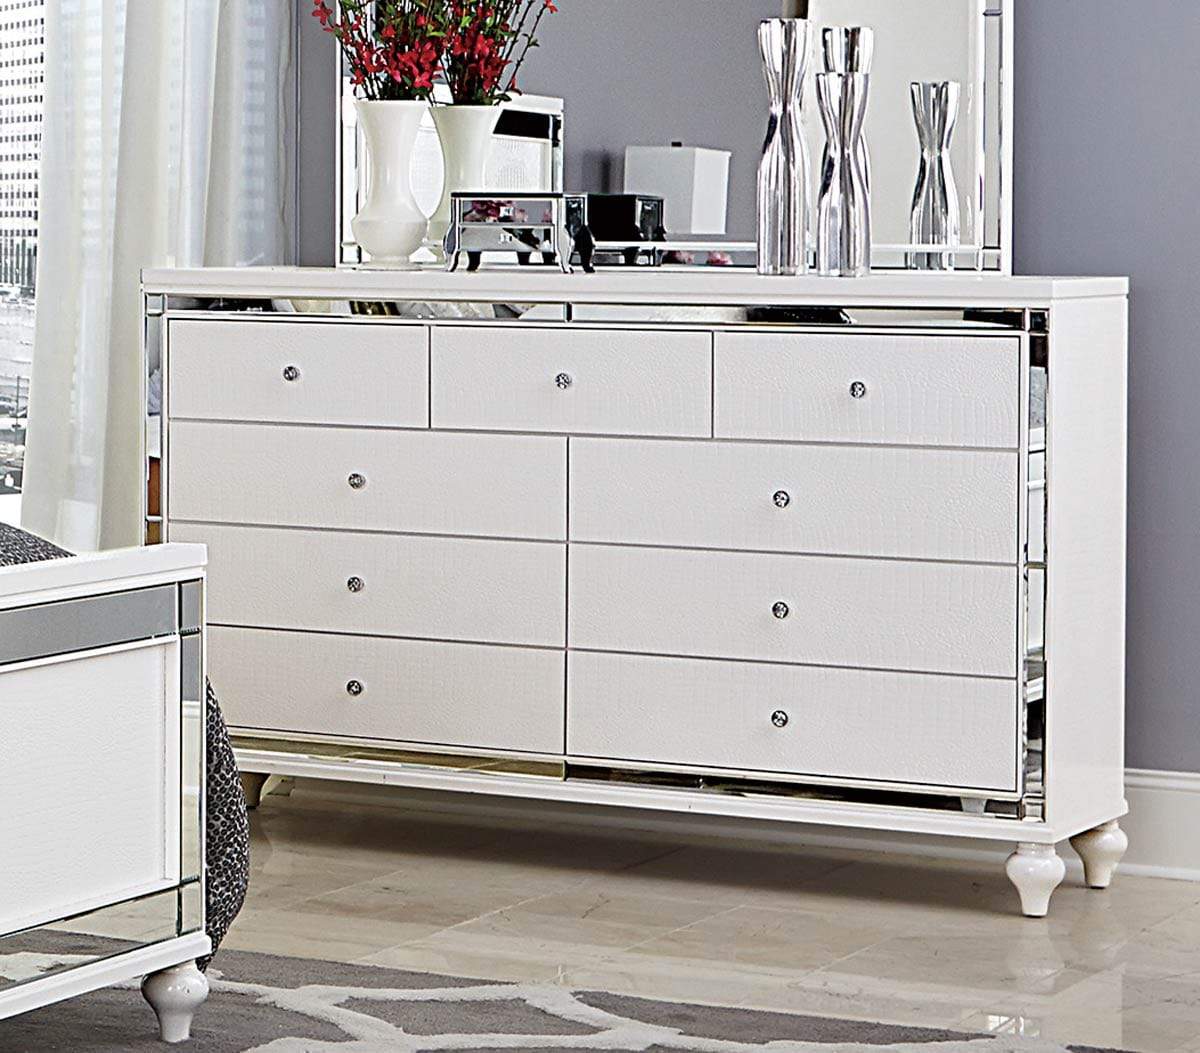 HomeRoots Outdoors Bed & Bath > Dressers White / Wood Wooden Dresser Accented With Mirror Outline, White